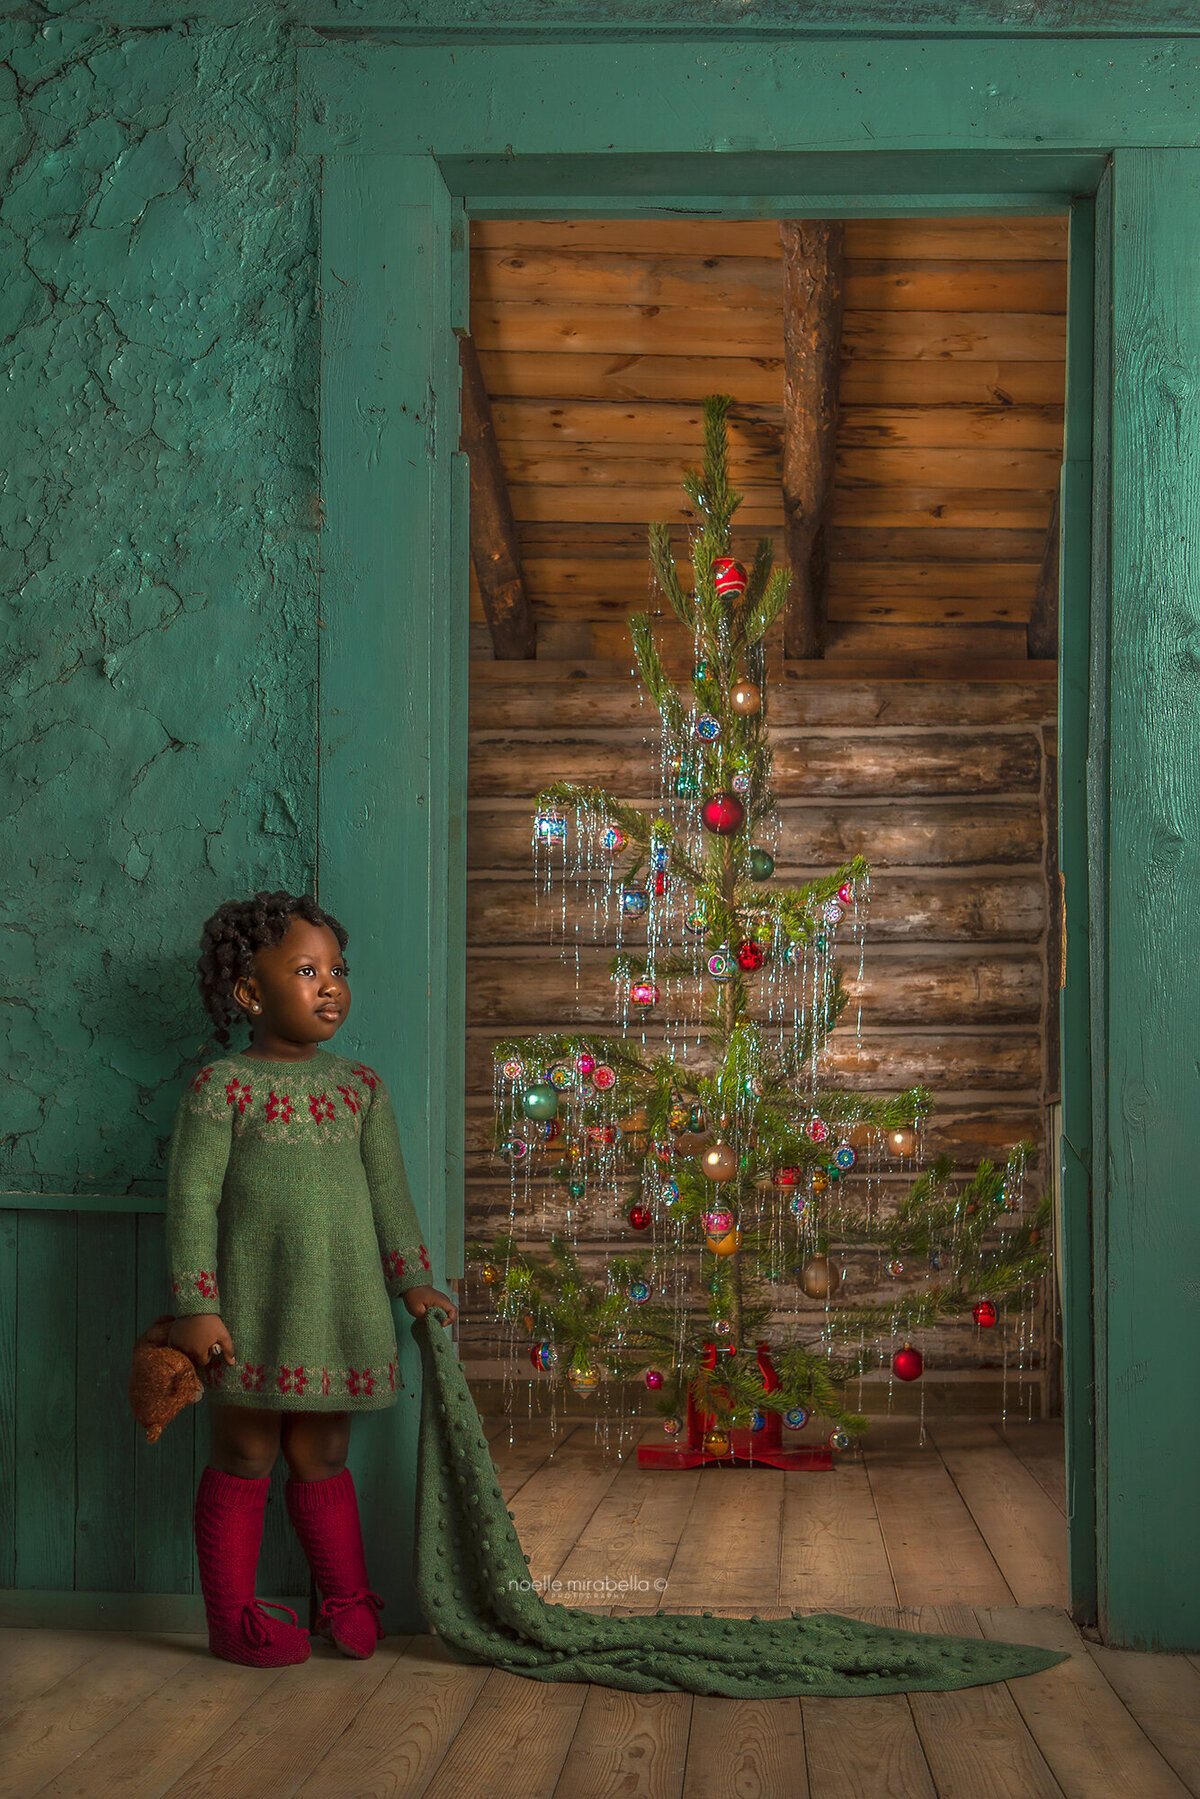 Young girl standing in doorway with vintage style pine Christmas tree in the background.